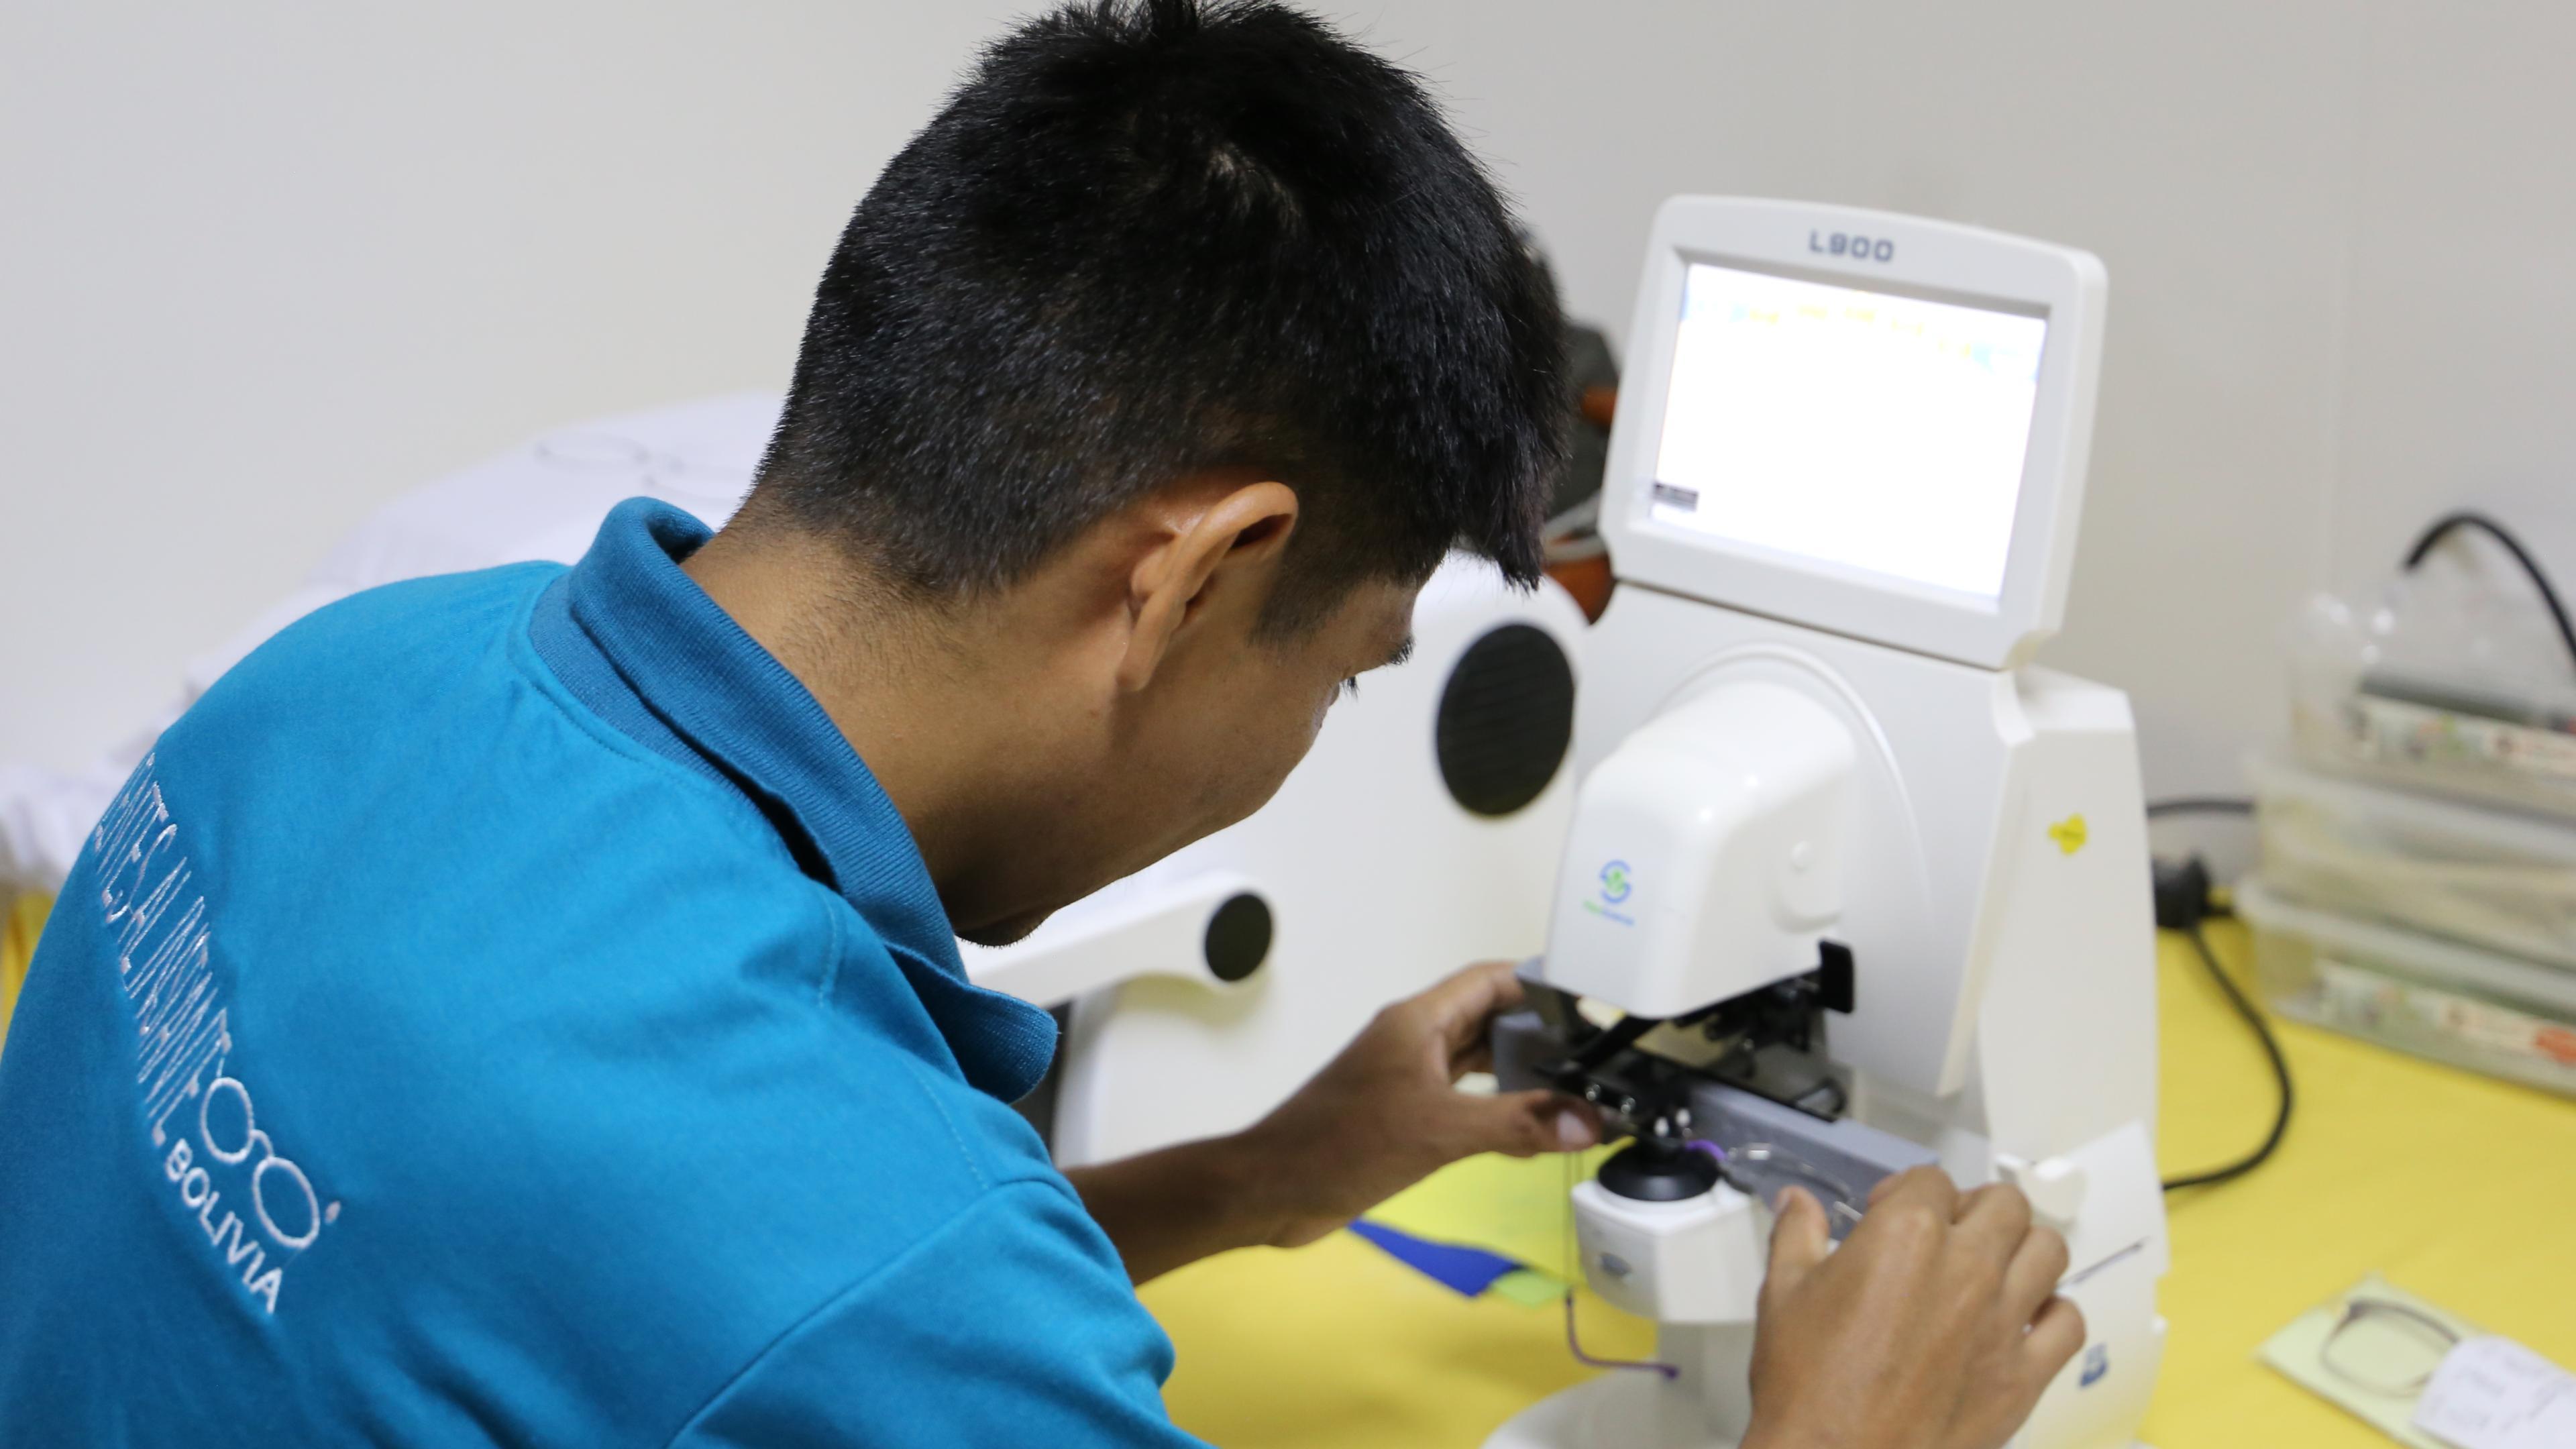 Man from Bolivia operates astigmatism grinding machine